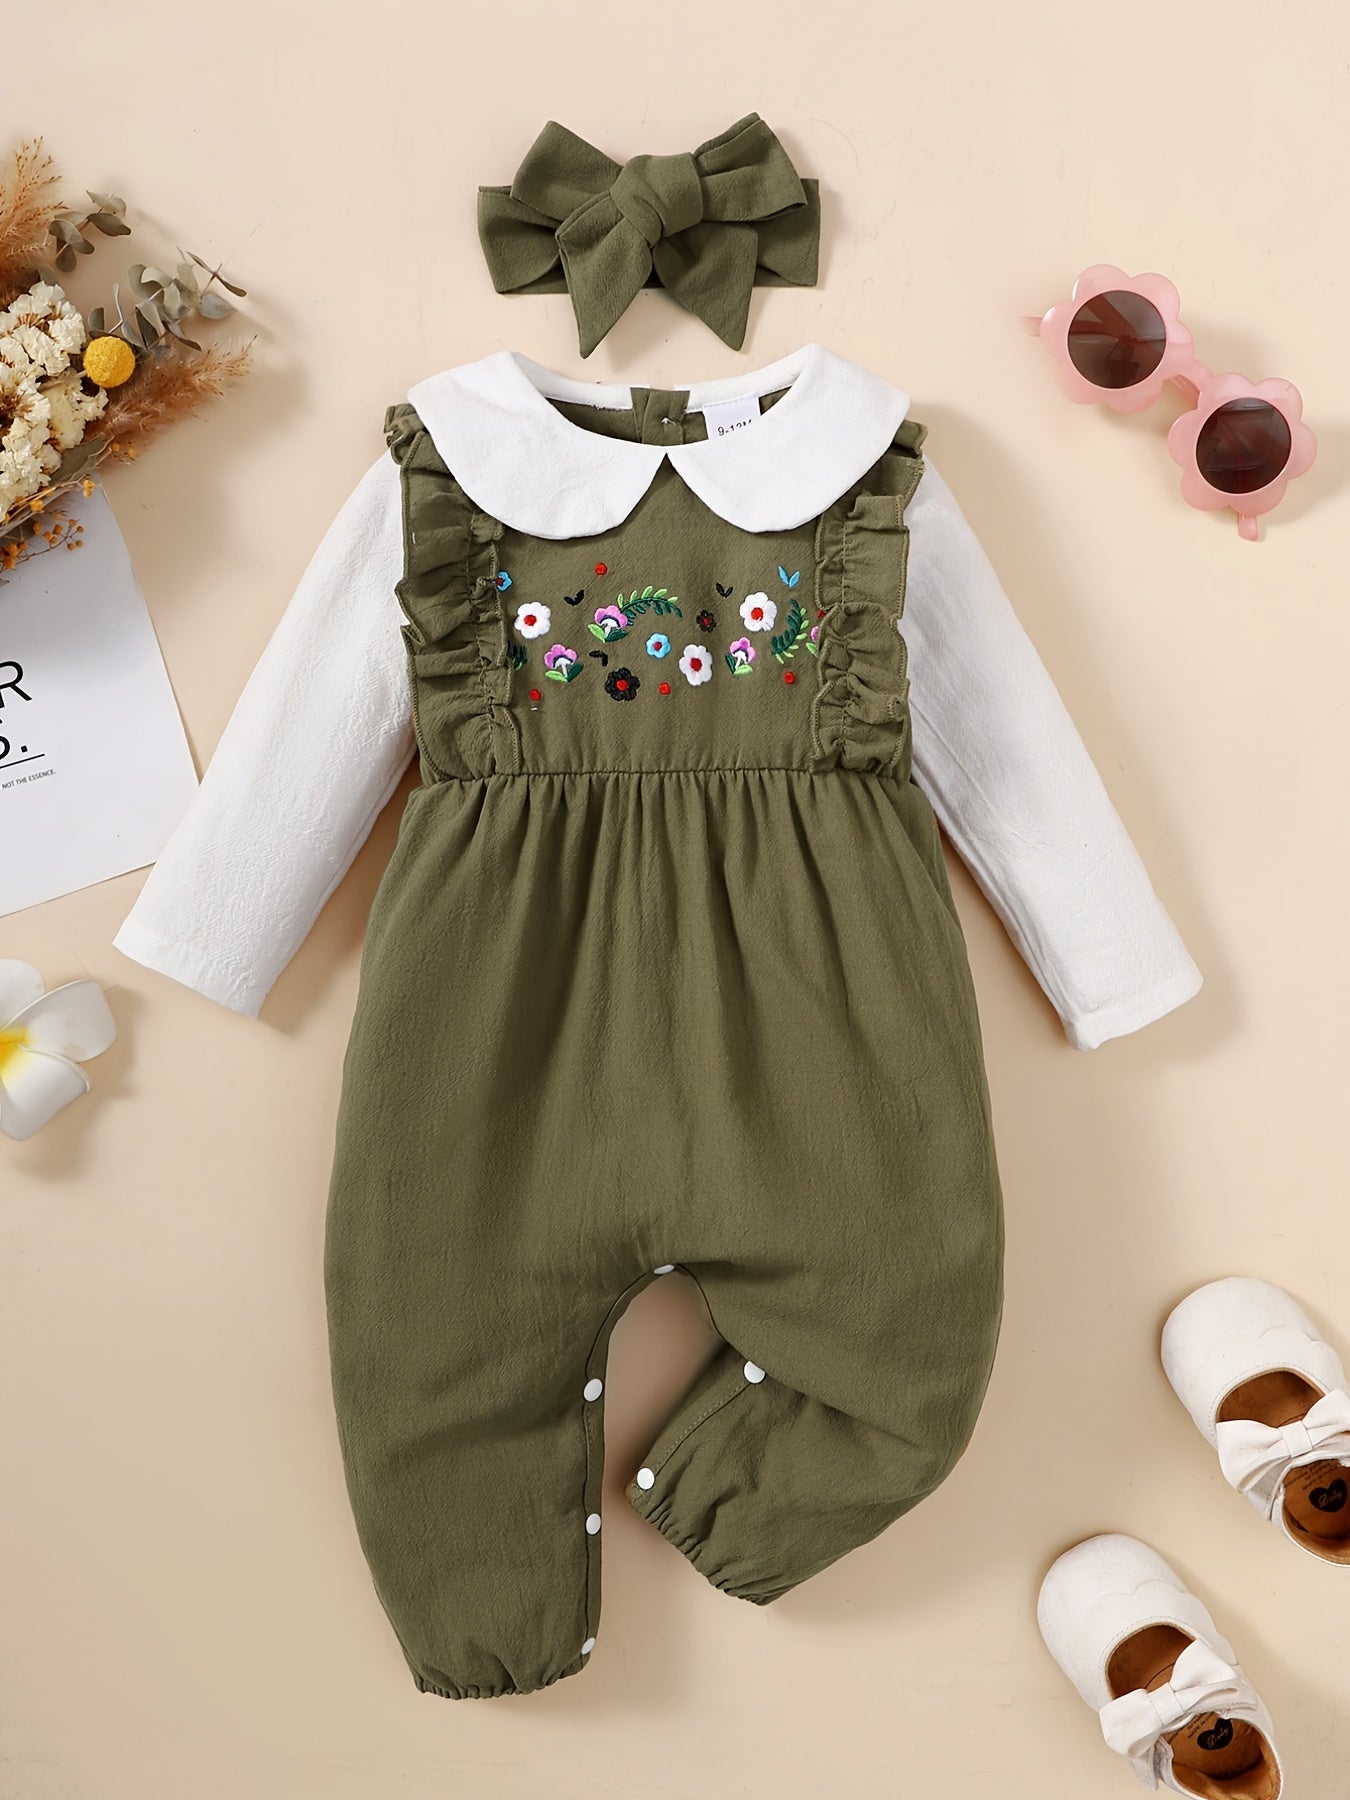 Newborn Infant Romper Flower Embroidery Long Sleeve Doll Collar Ruffle Jumpsuit & Headband For Baby Girls Kids Clothes